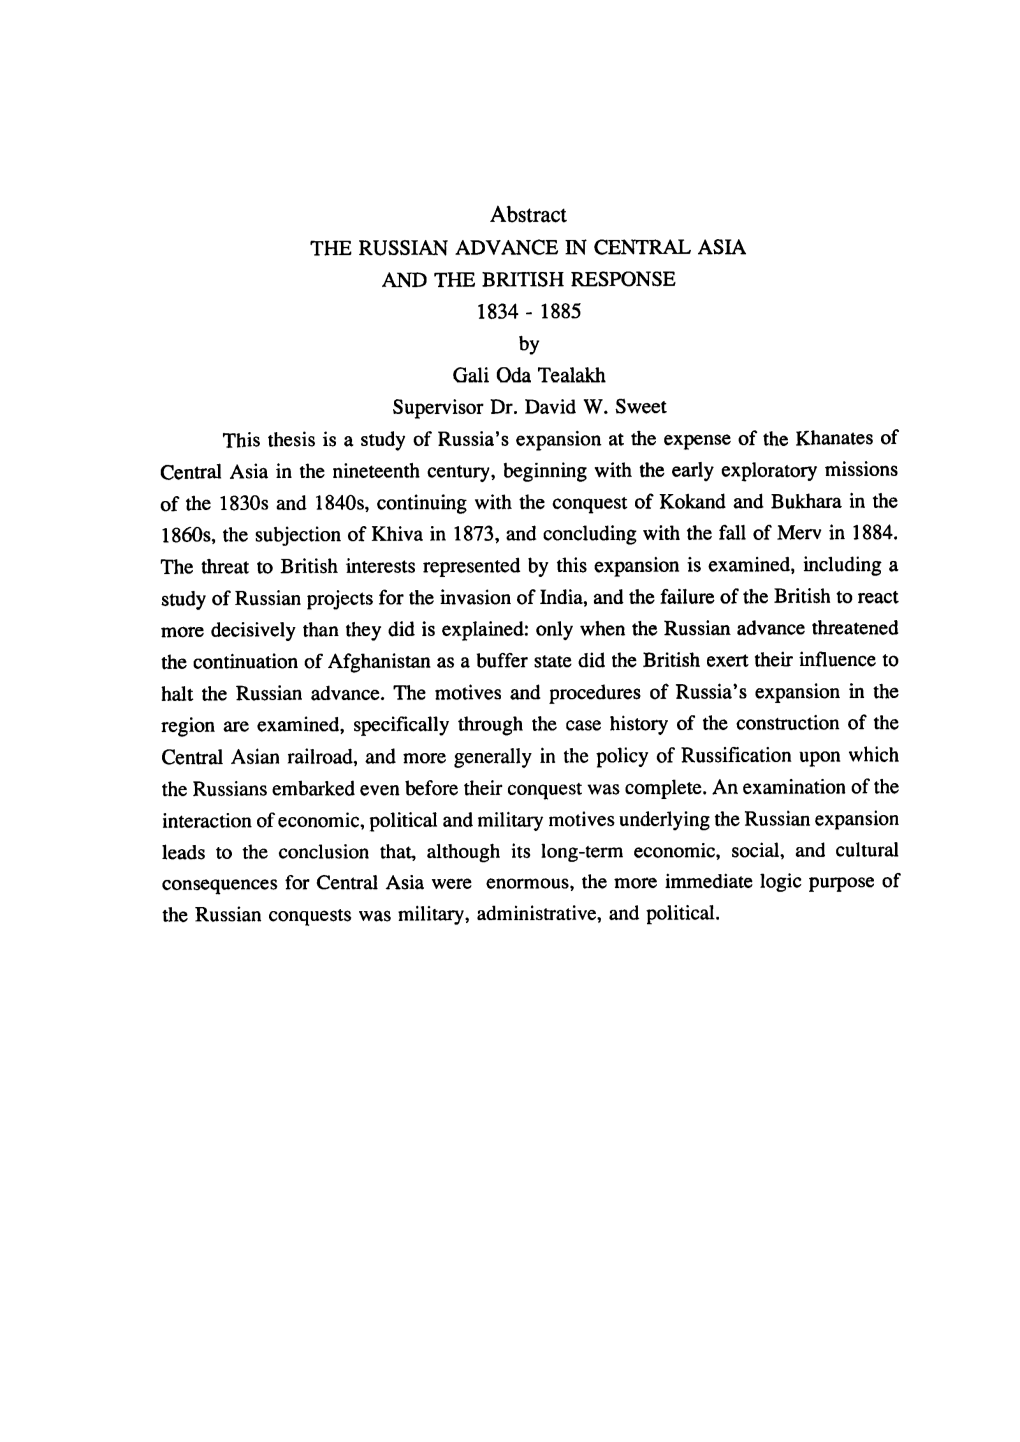 Abstract the RUSSIAN ADVANCE in CENTRAL ASIA and the BRITISH RESPONSE 1834 - 1885 by Gali Oda Tealakh Supervisor Dr